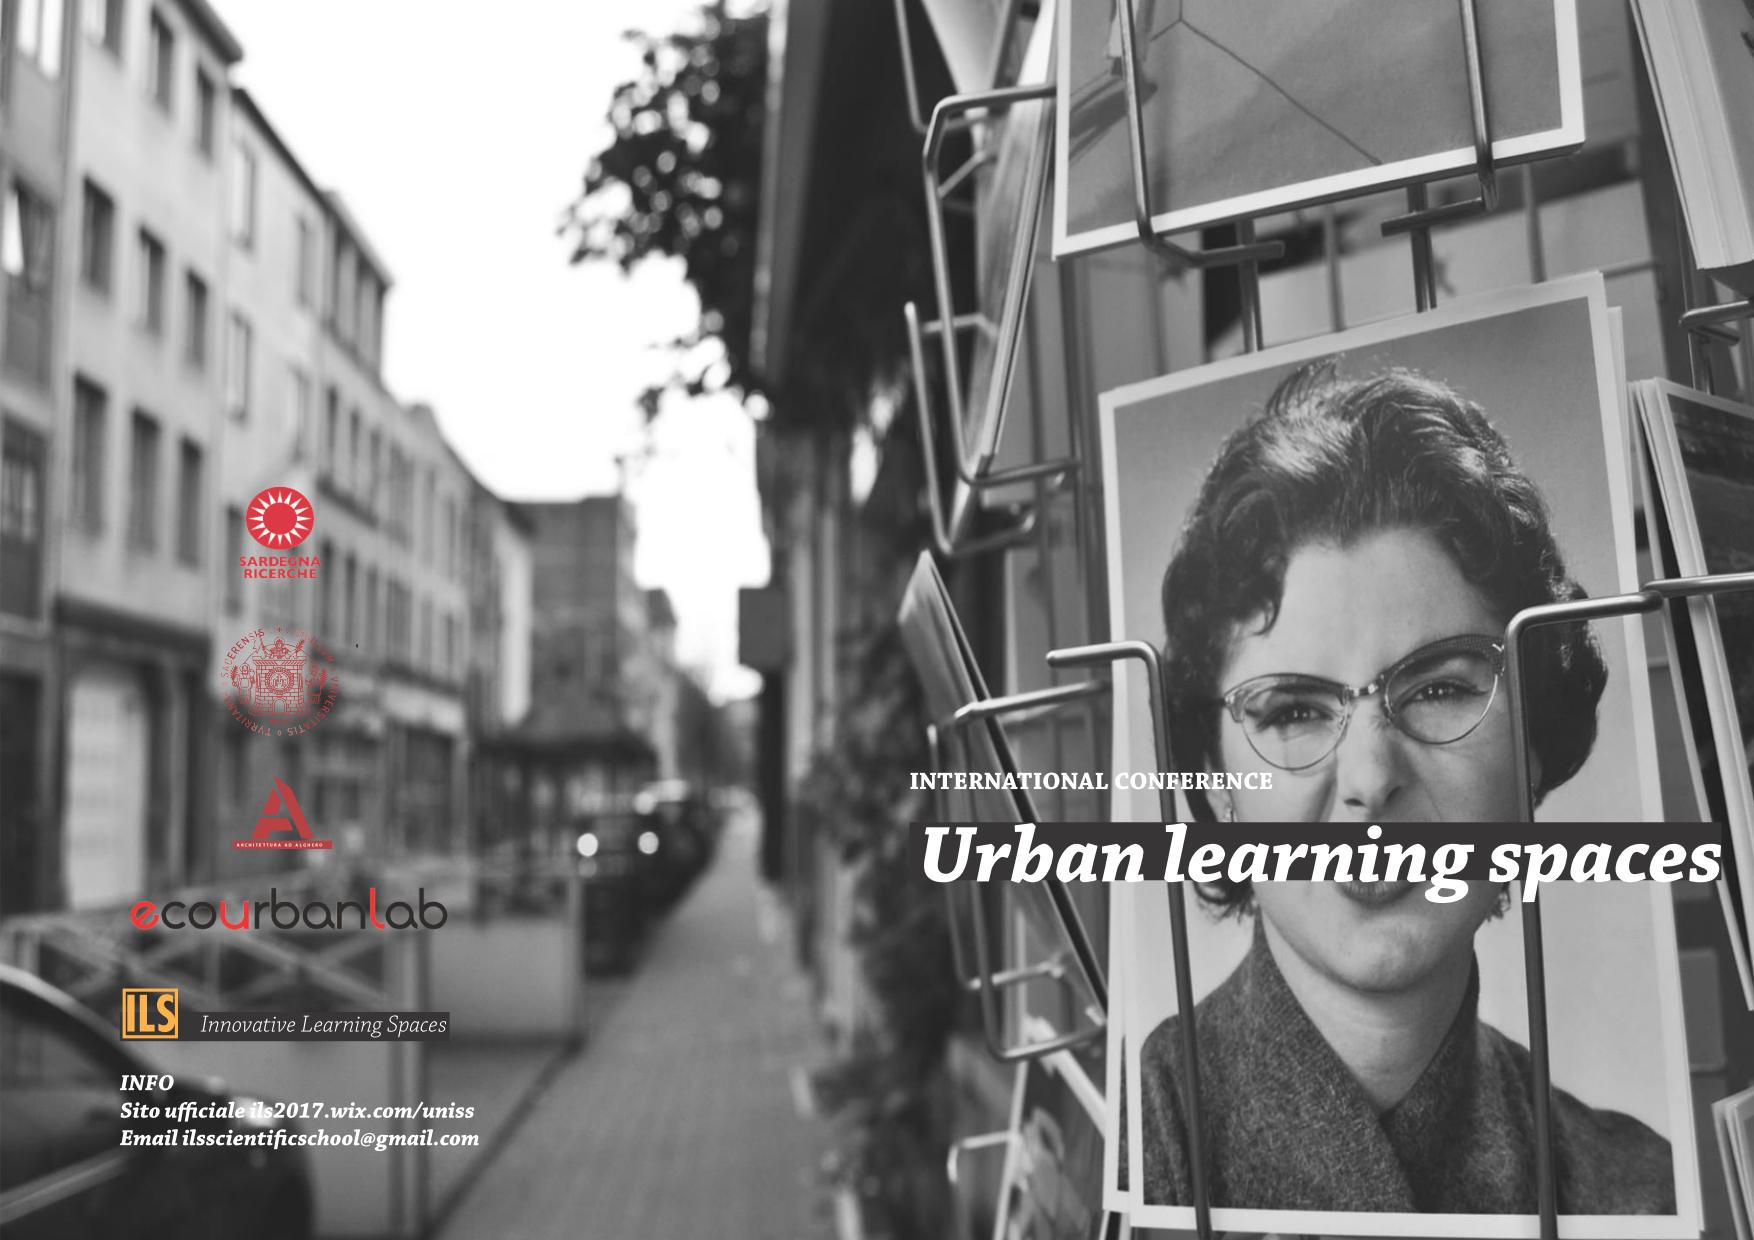 Urban learning spaces